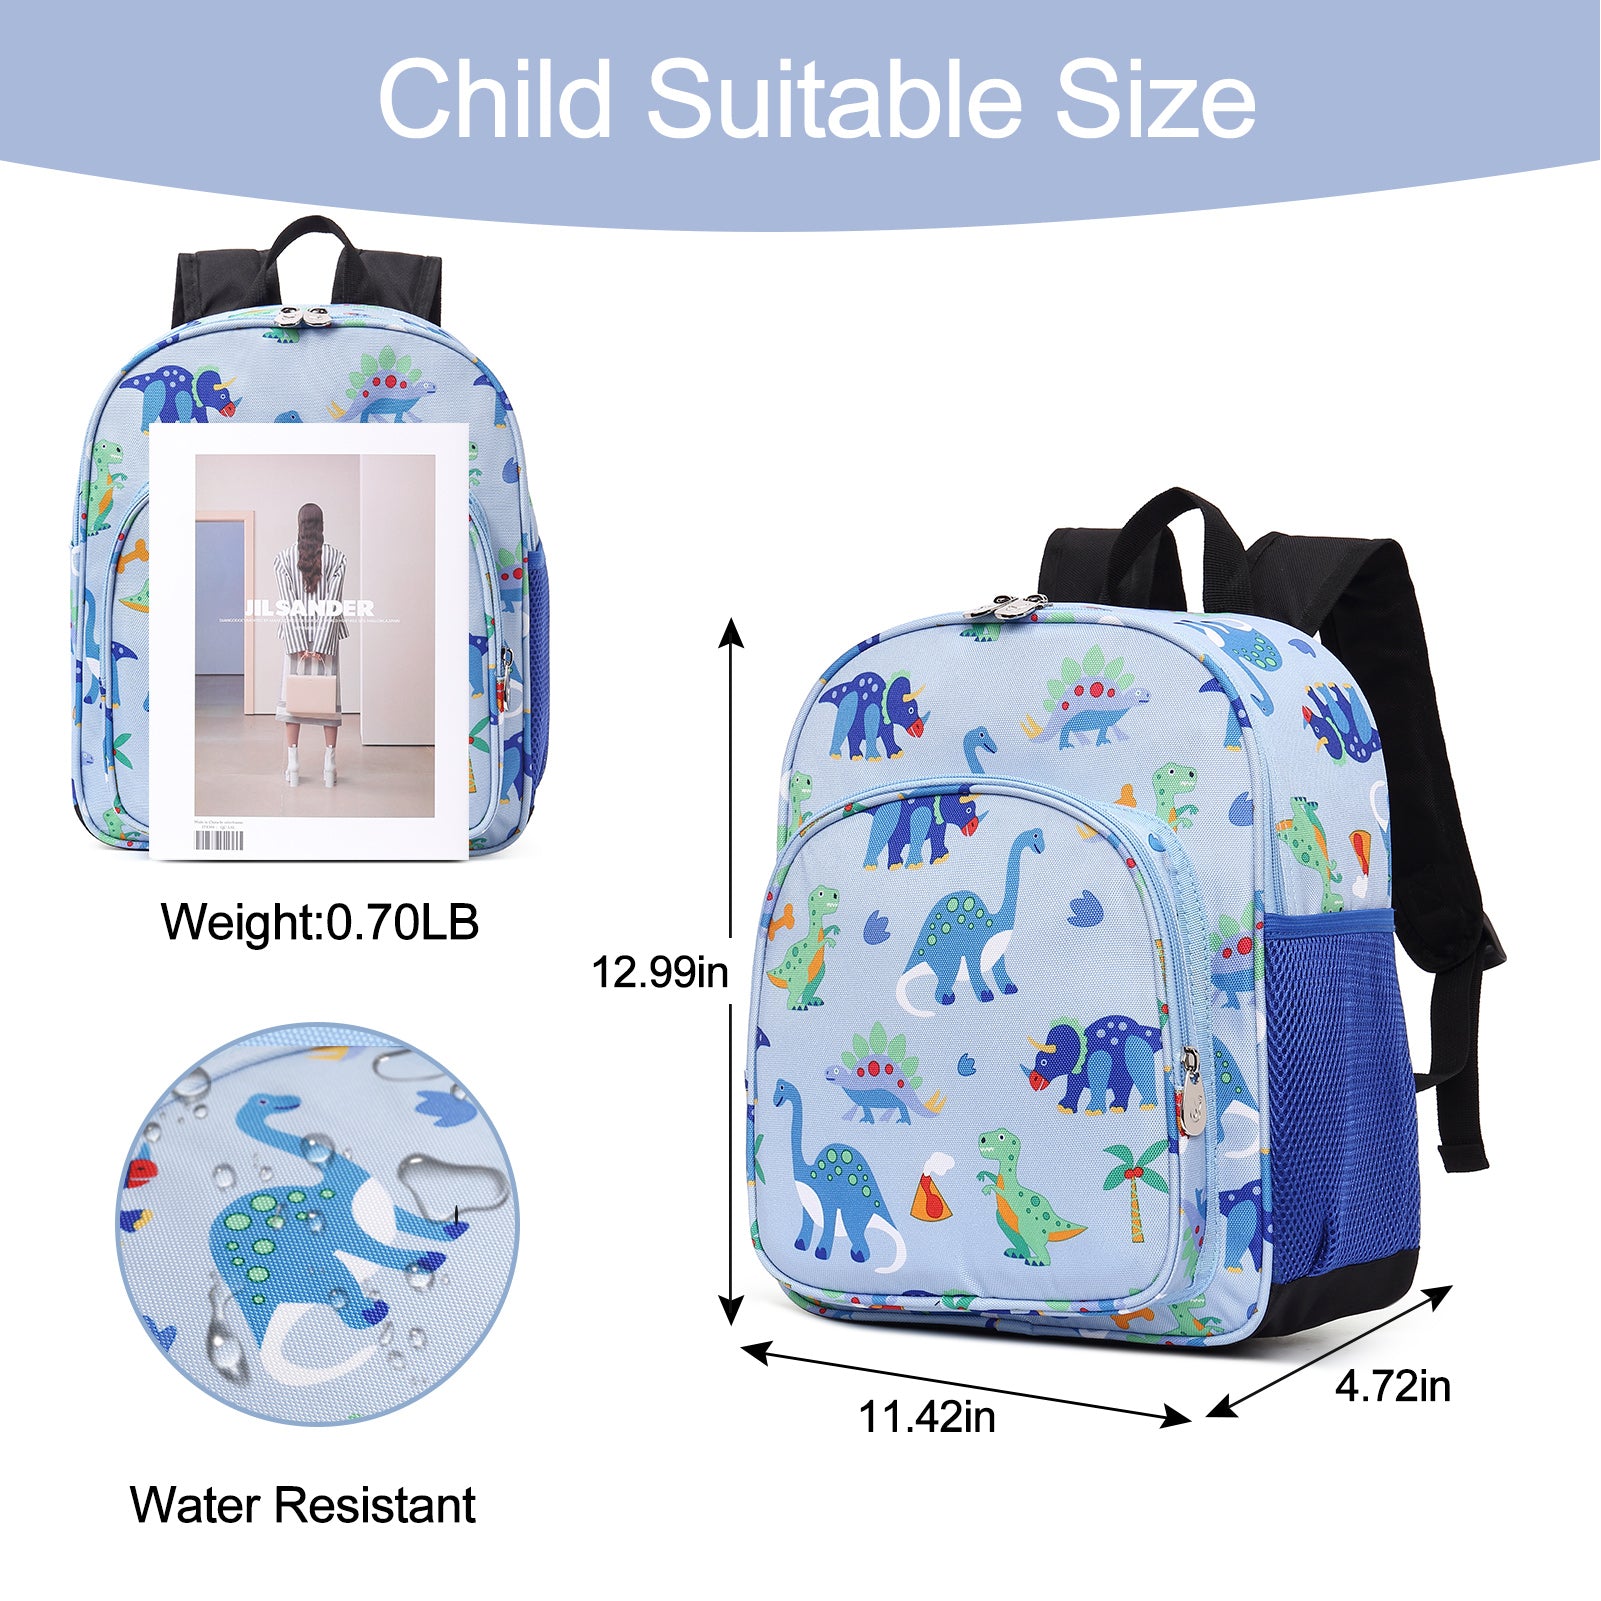 Gymboree Unisex-Child and Toddler Backpacks, Purfect Cheetah, One Size